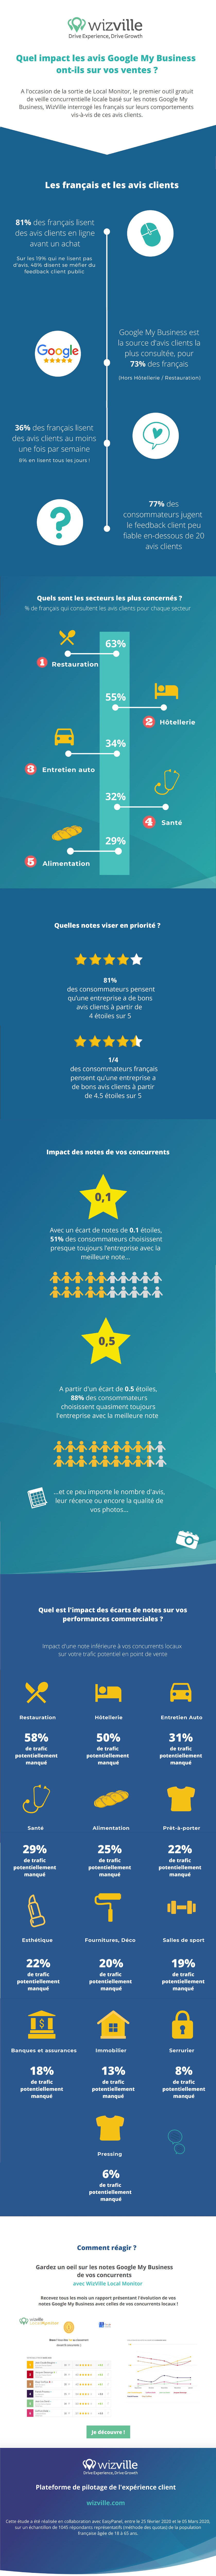 infographie Local Monitor v11 10092020